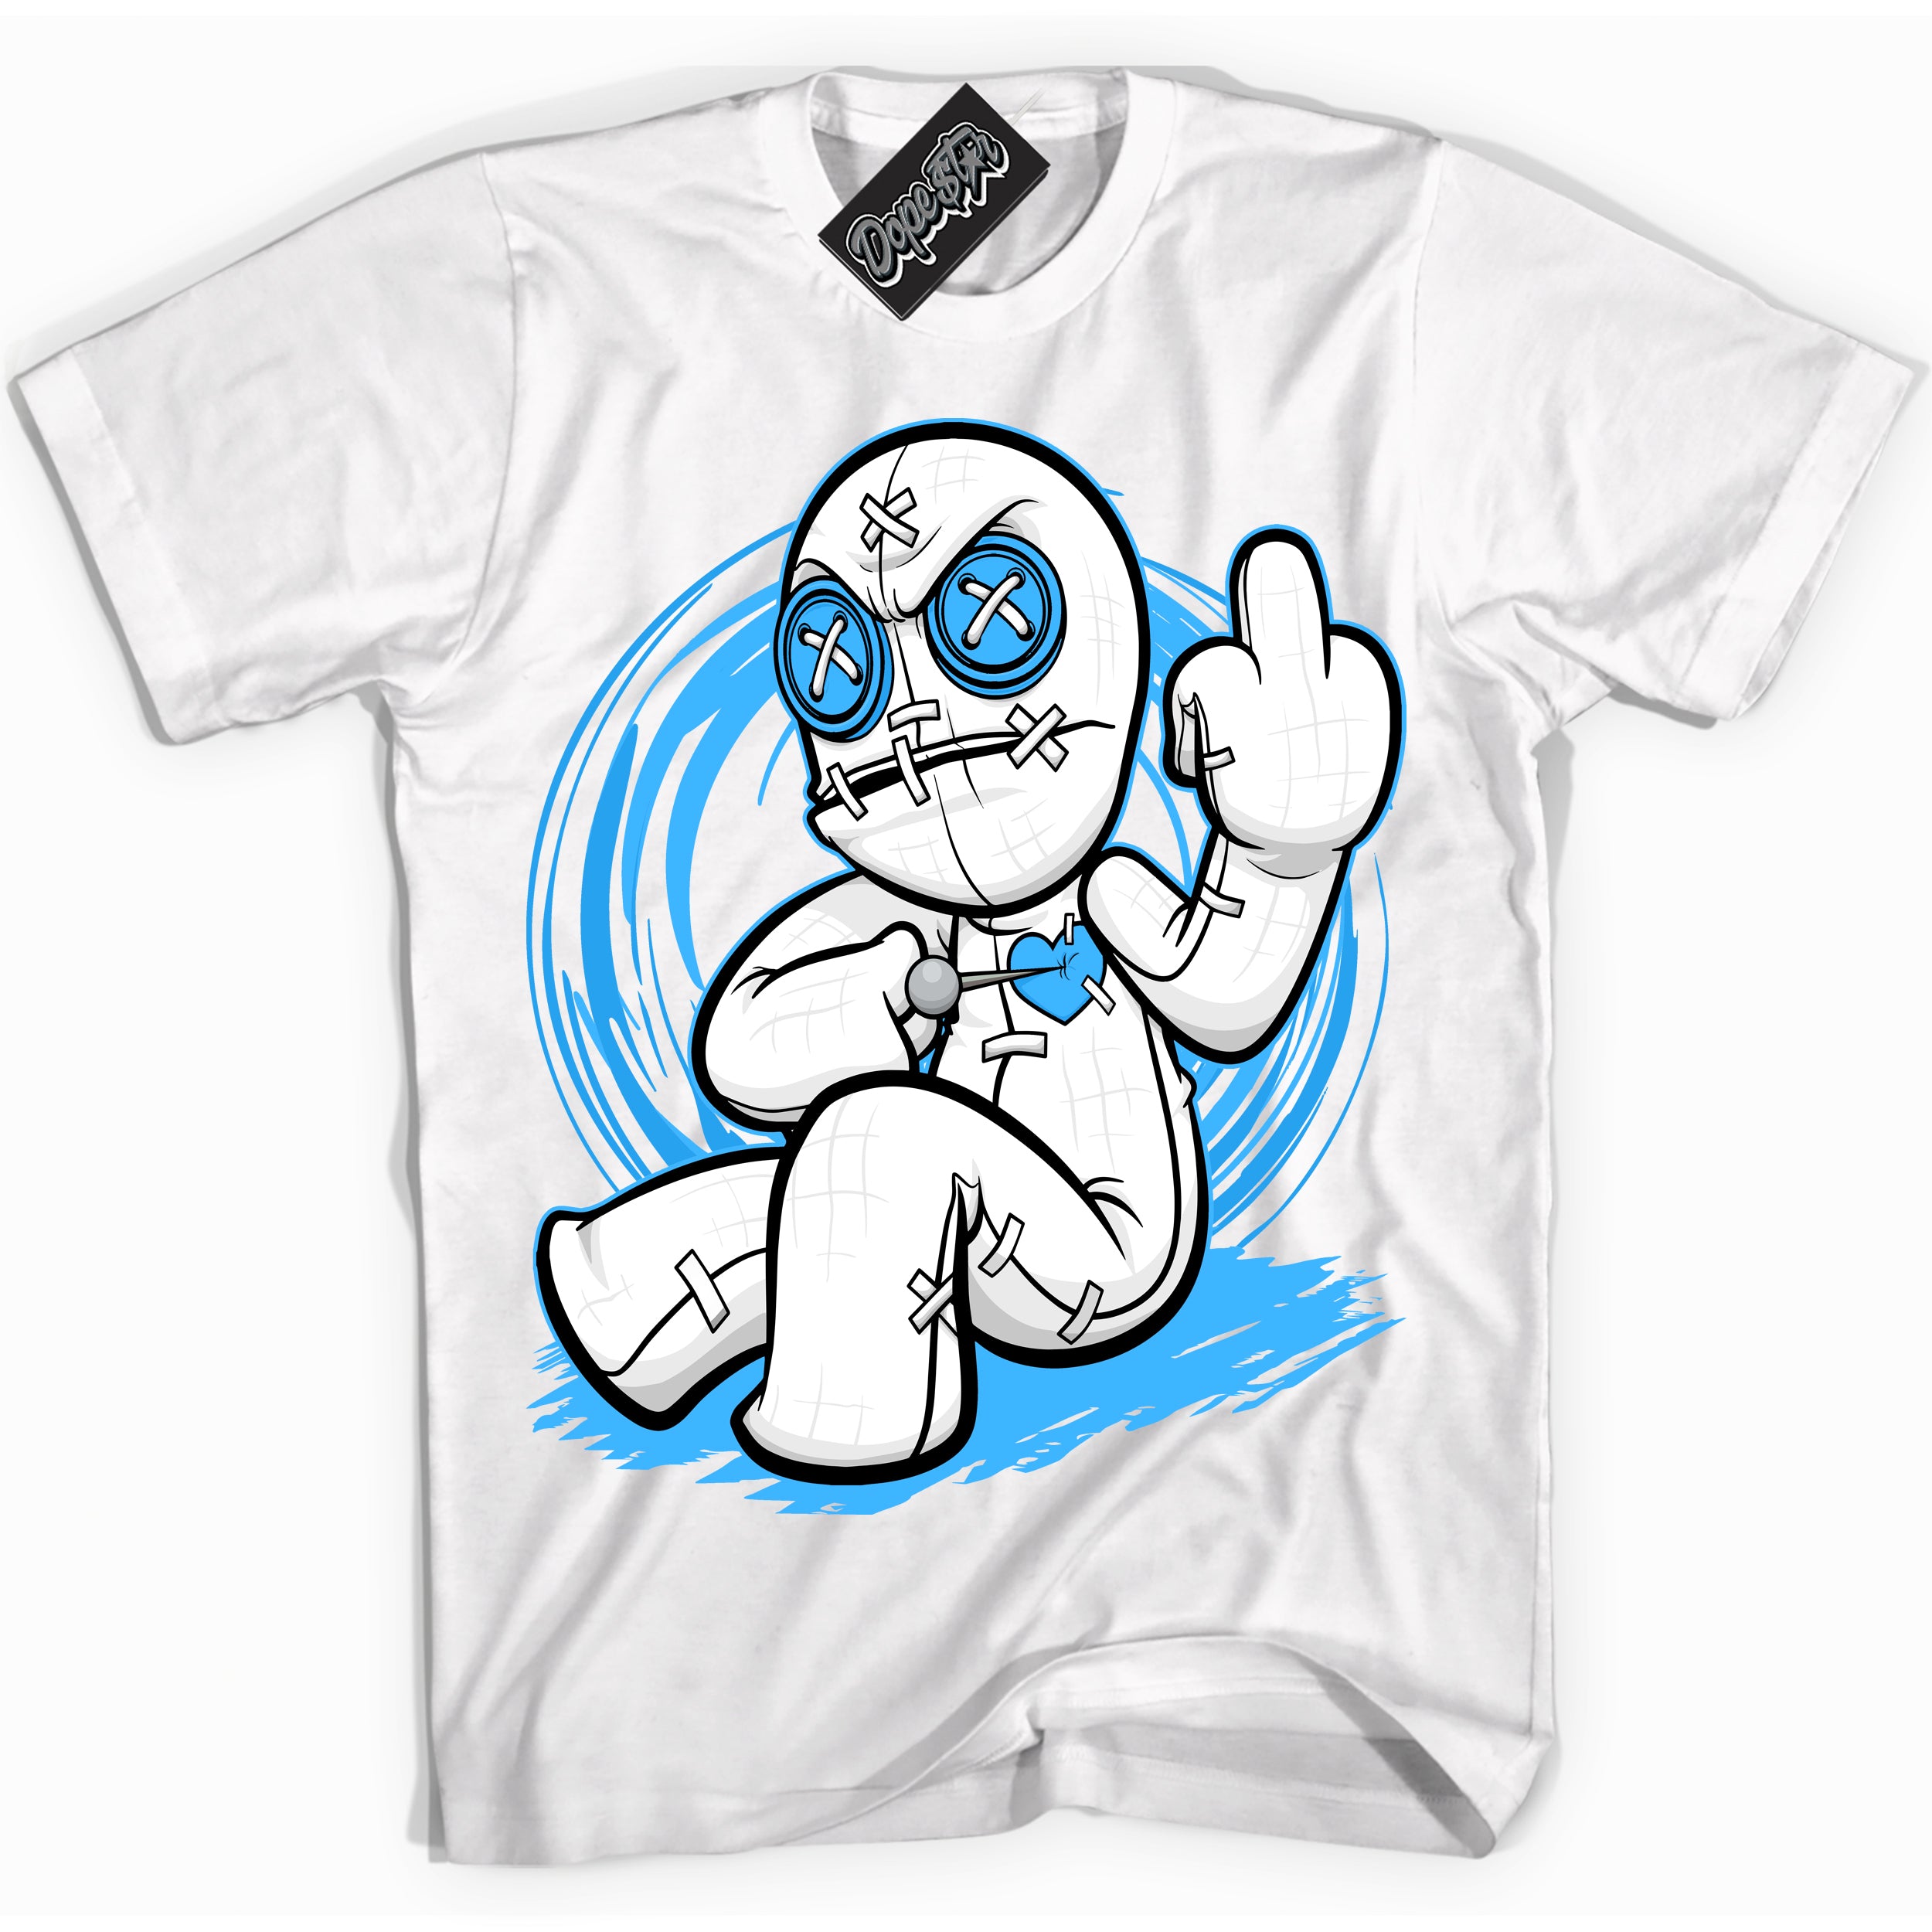 Cool White graphic tee with “ VooDoo Doll ” design, that perfectly matches Powder Blue 9s sneakers 